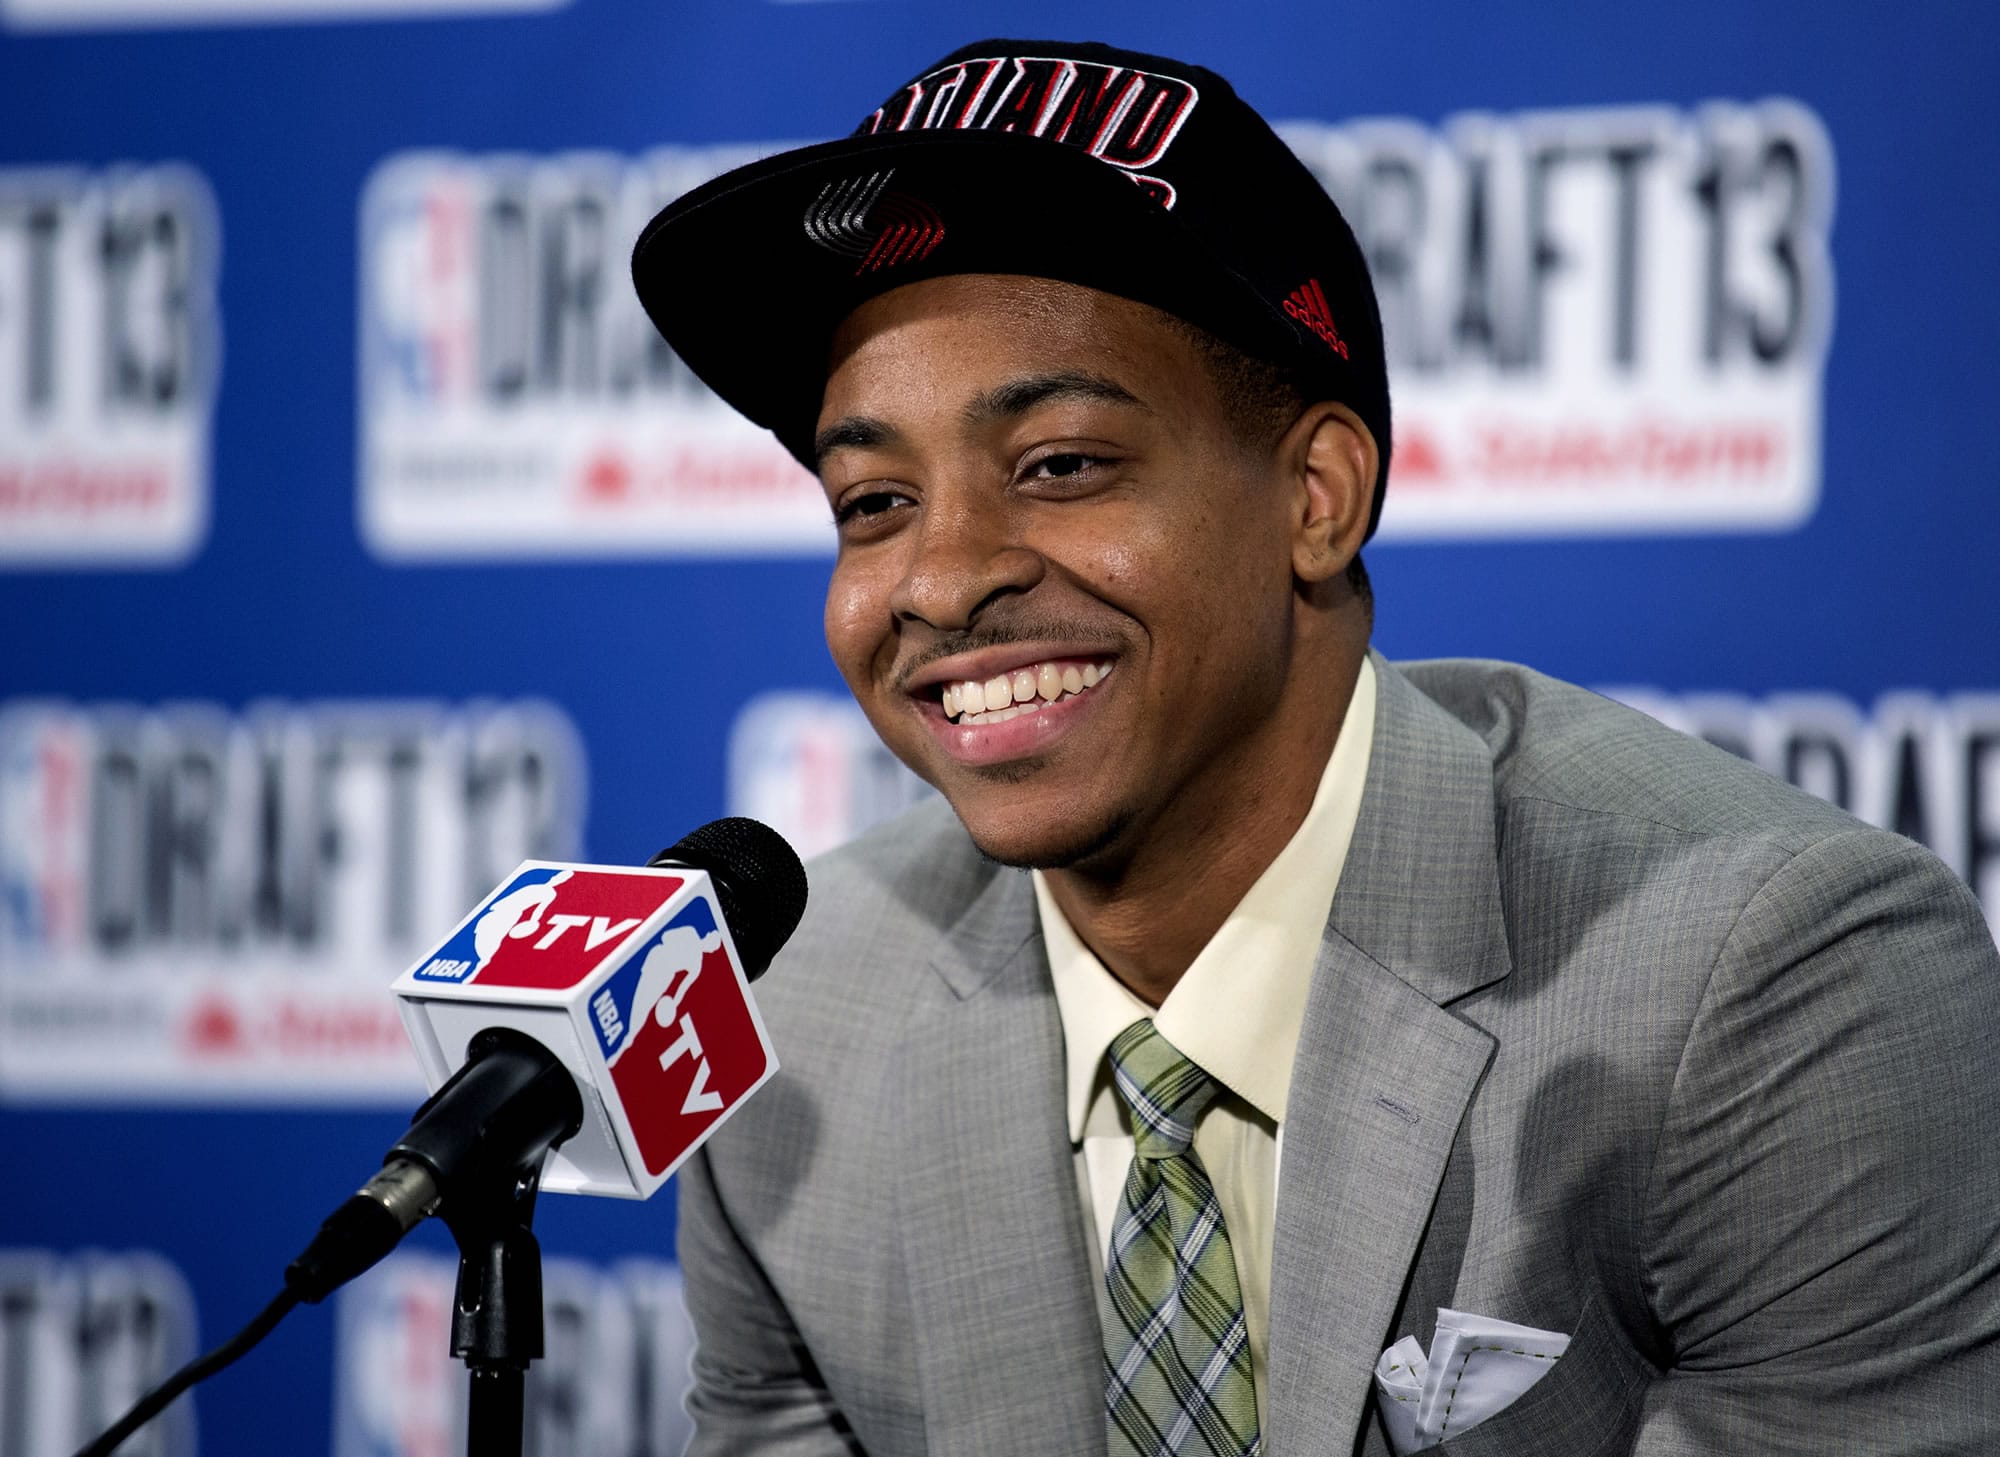 Lehigh's CJ McCollum, picked by the Portland Trail Blazers in the first round of the NBA basketball draft, smiles during a news conference Thursday in New York.